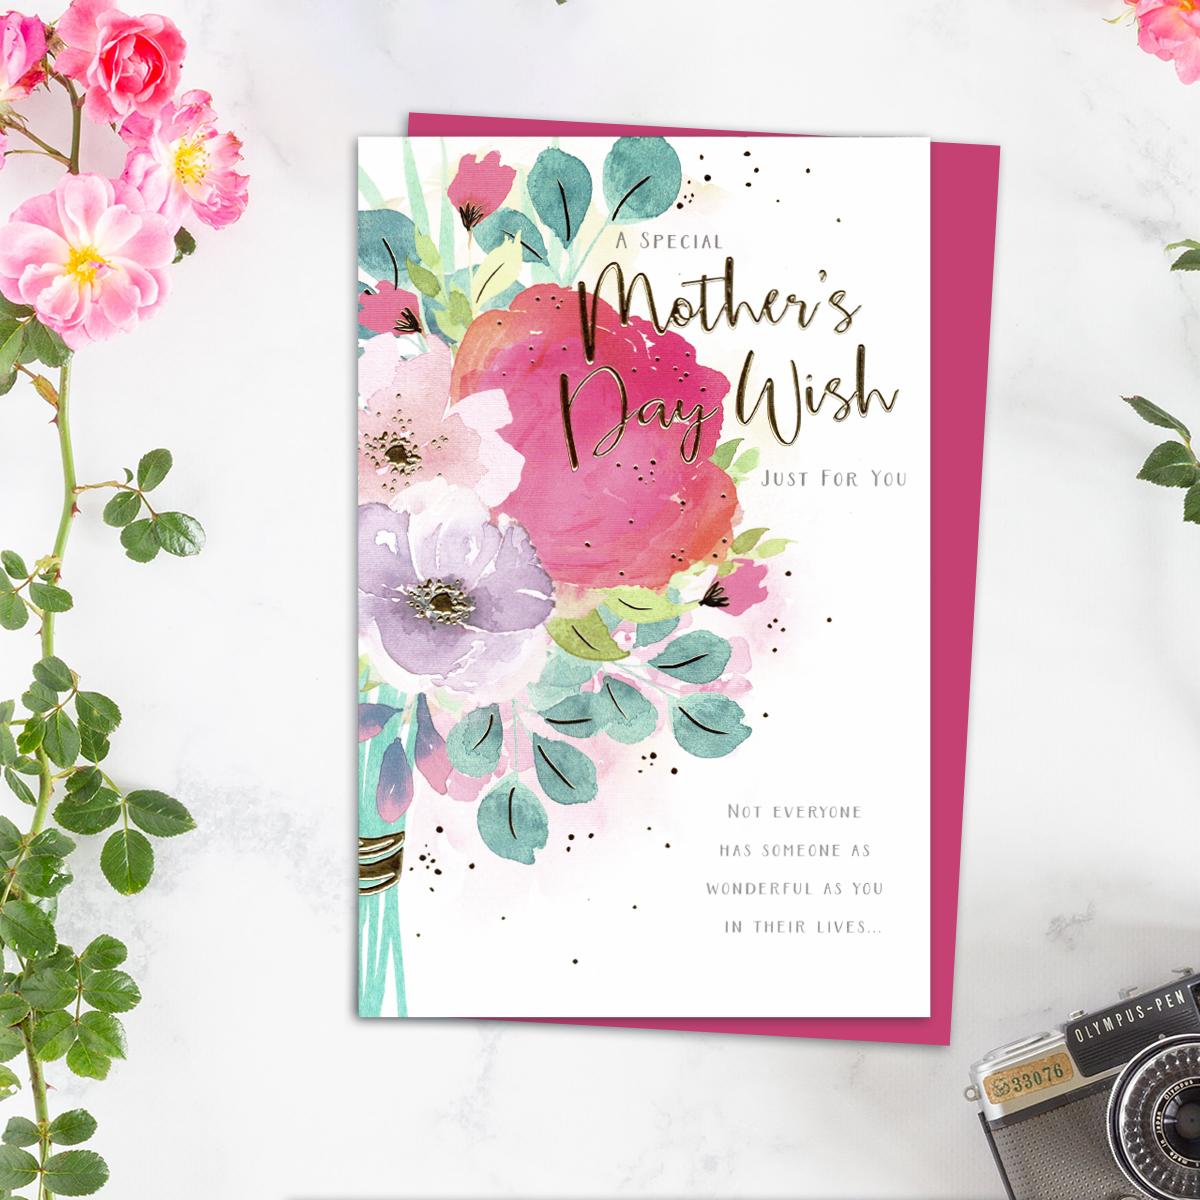 Mothers Day Wish Greeting Card Alongside Its Magenta Envelope